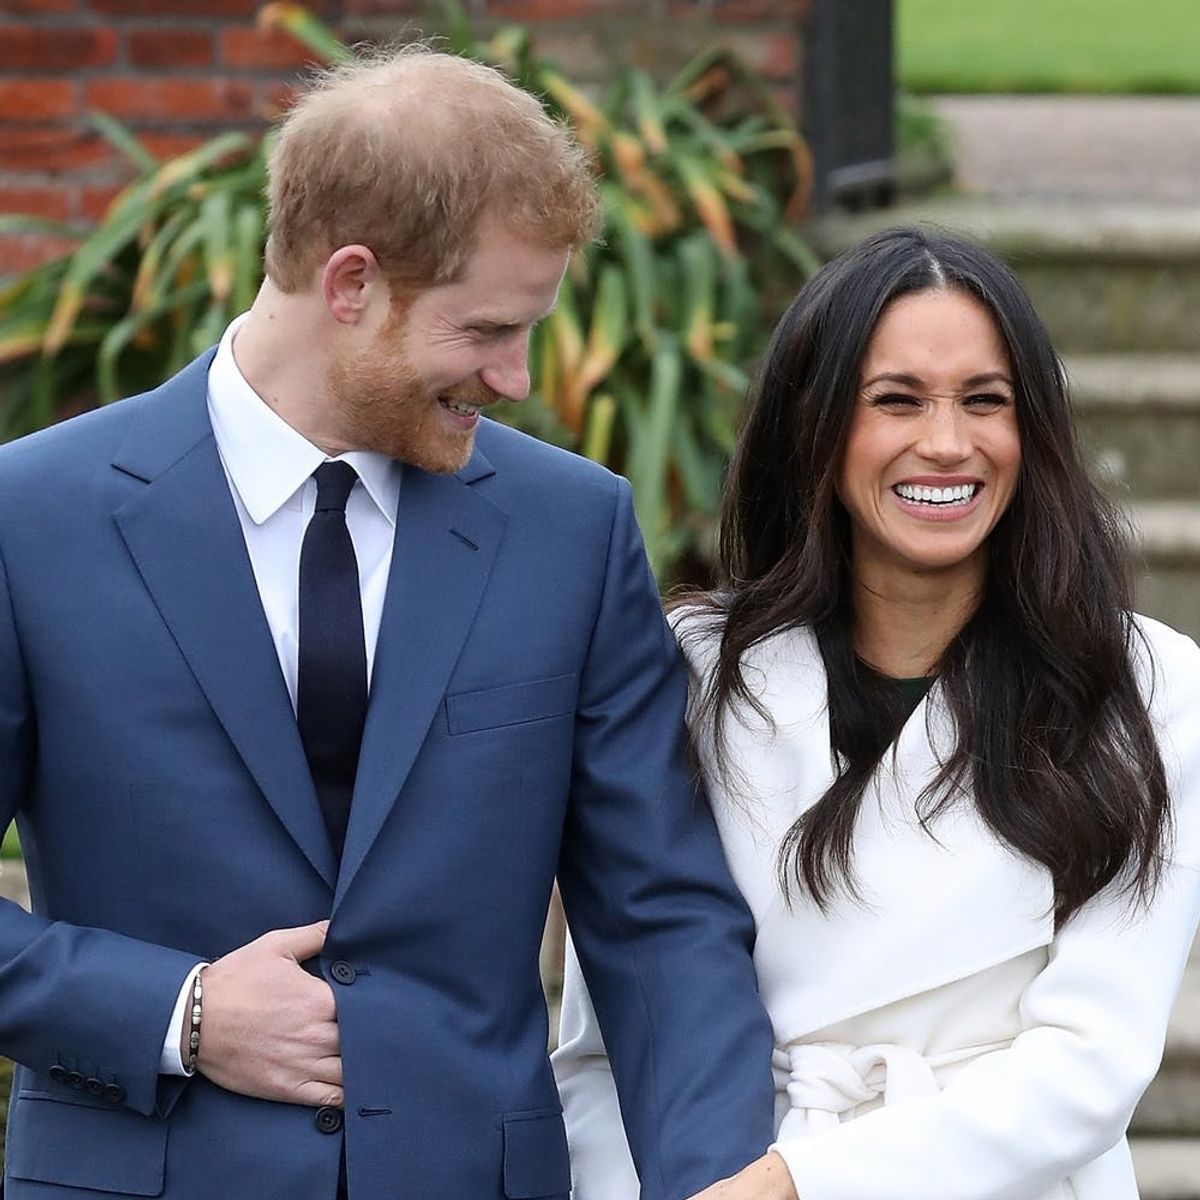 Everything We Know About Prince Harry and Meghan Markle’s Royal Wedding